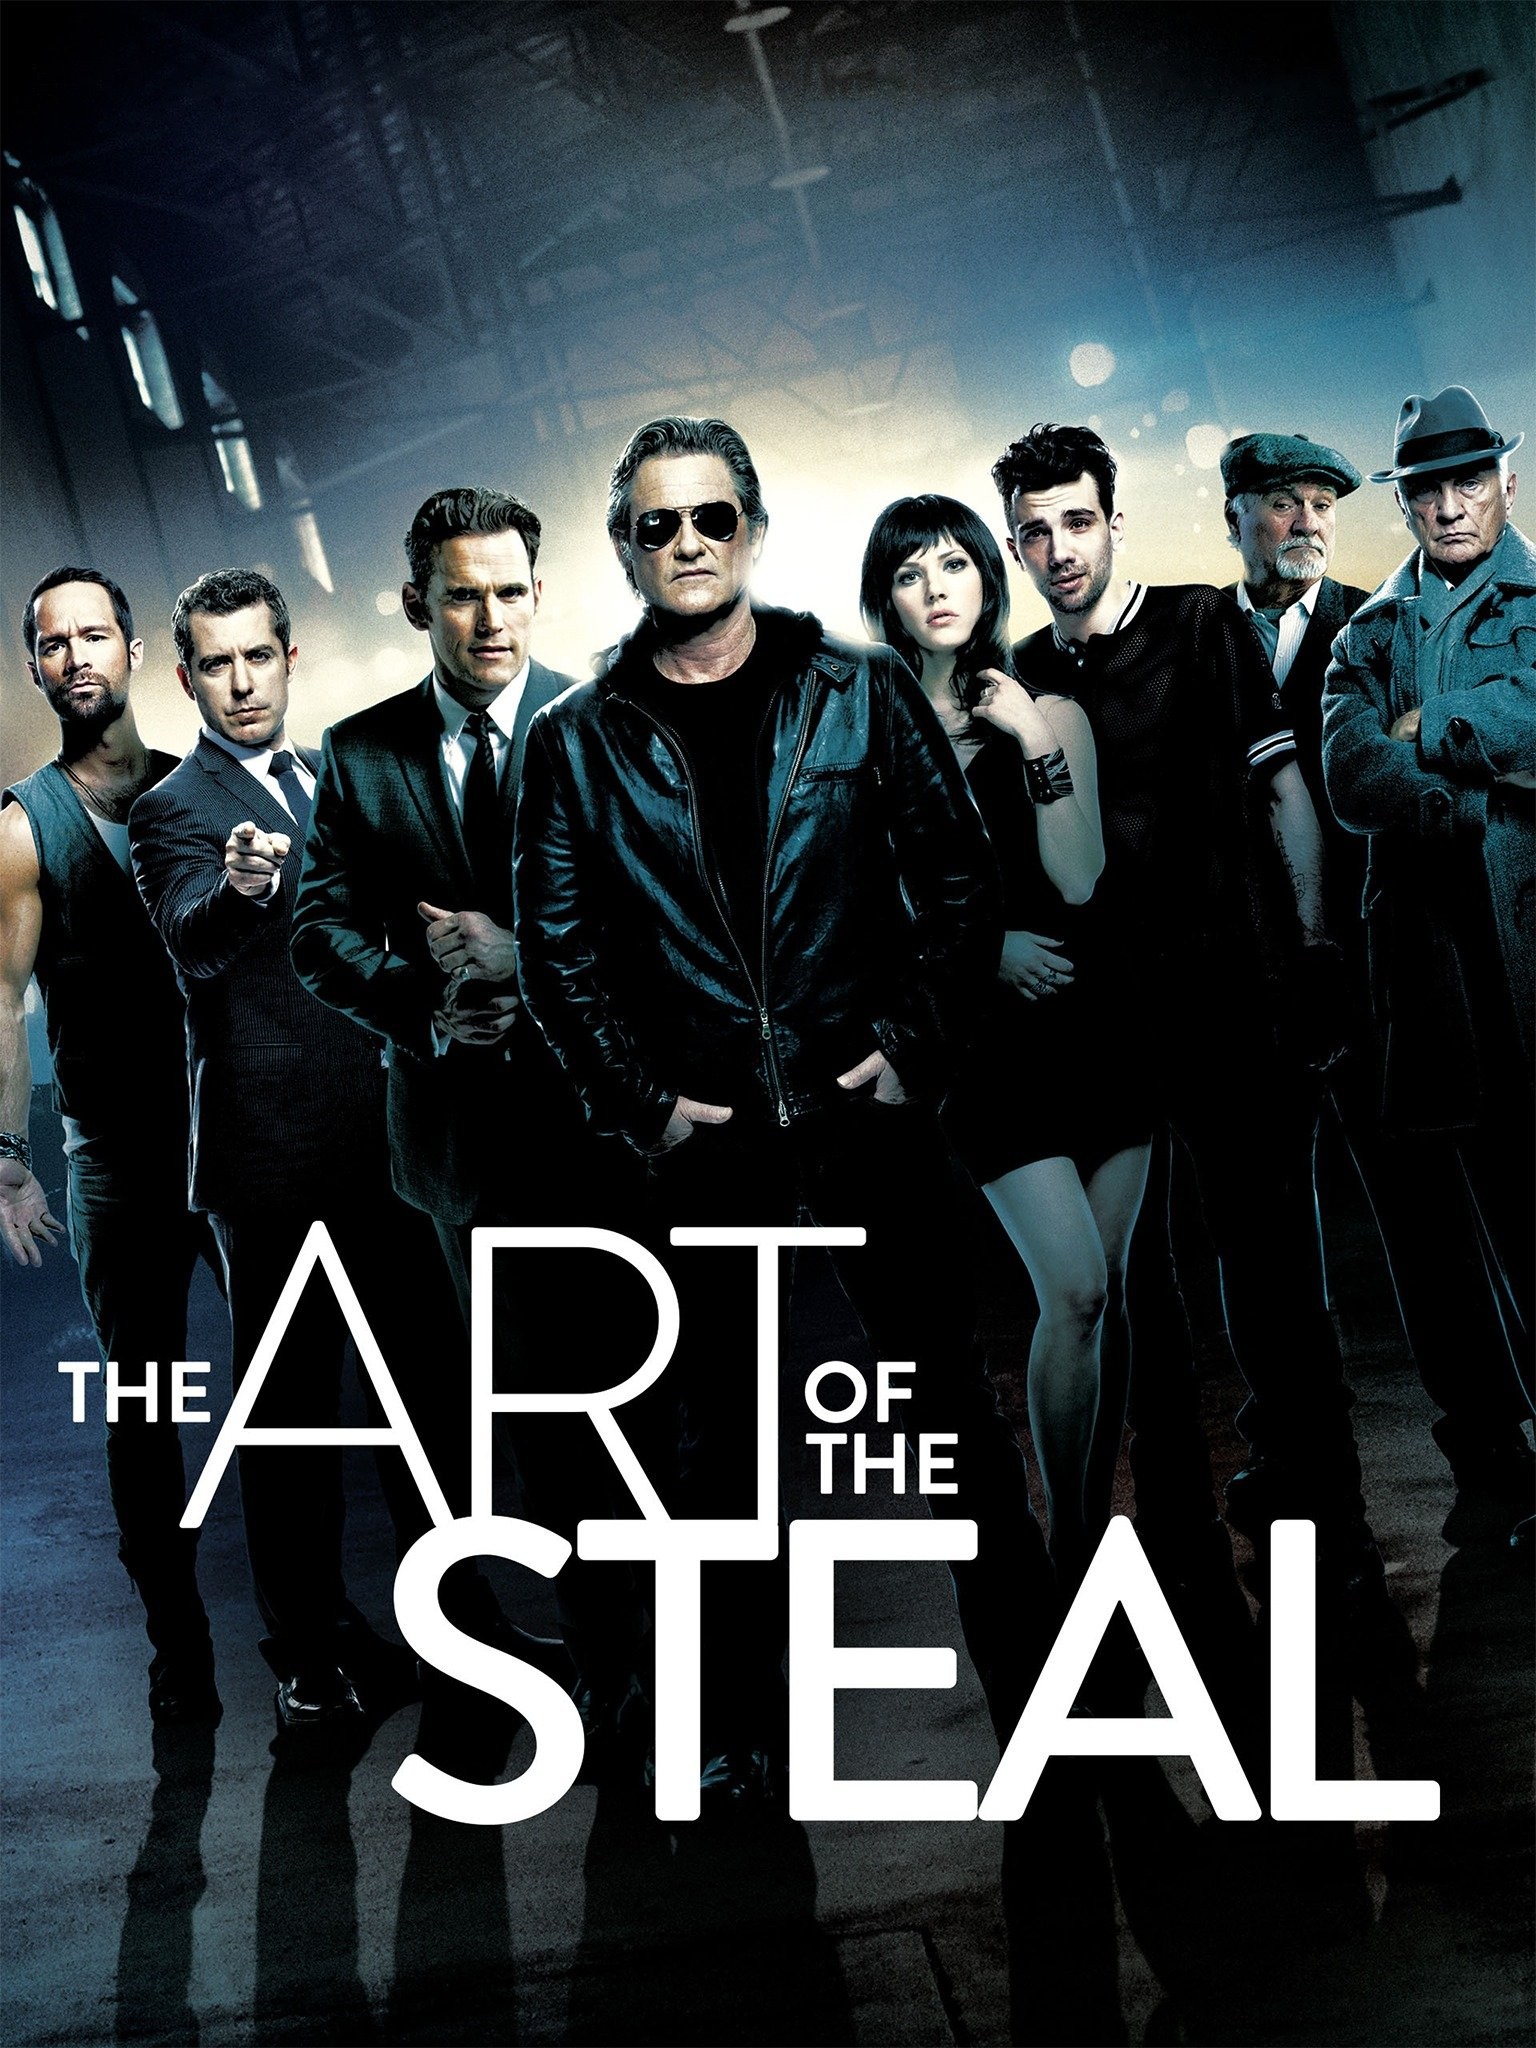 The Art of the Steal (2009) - IMDb